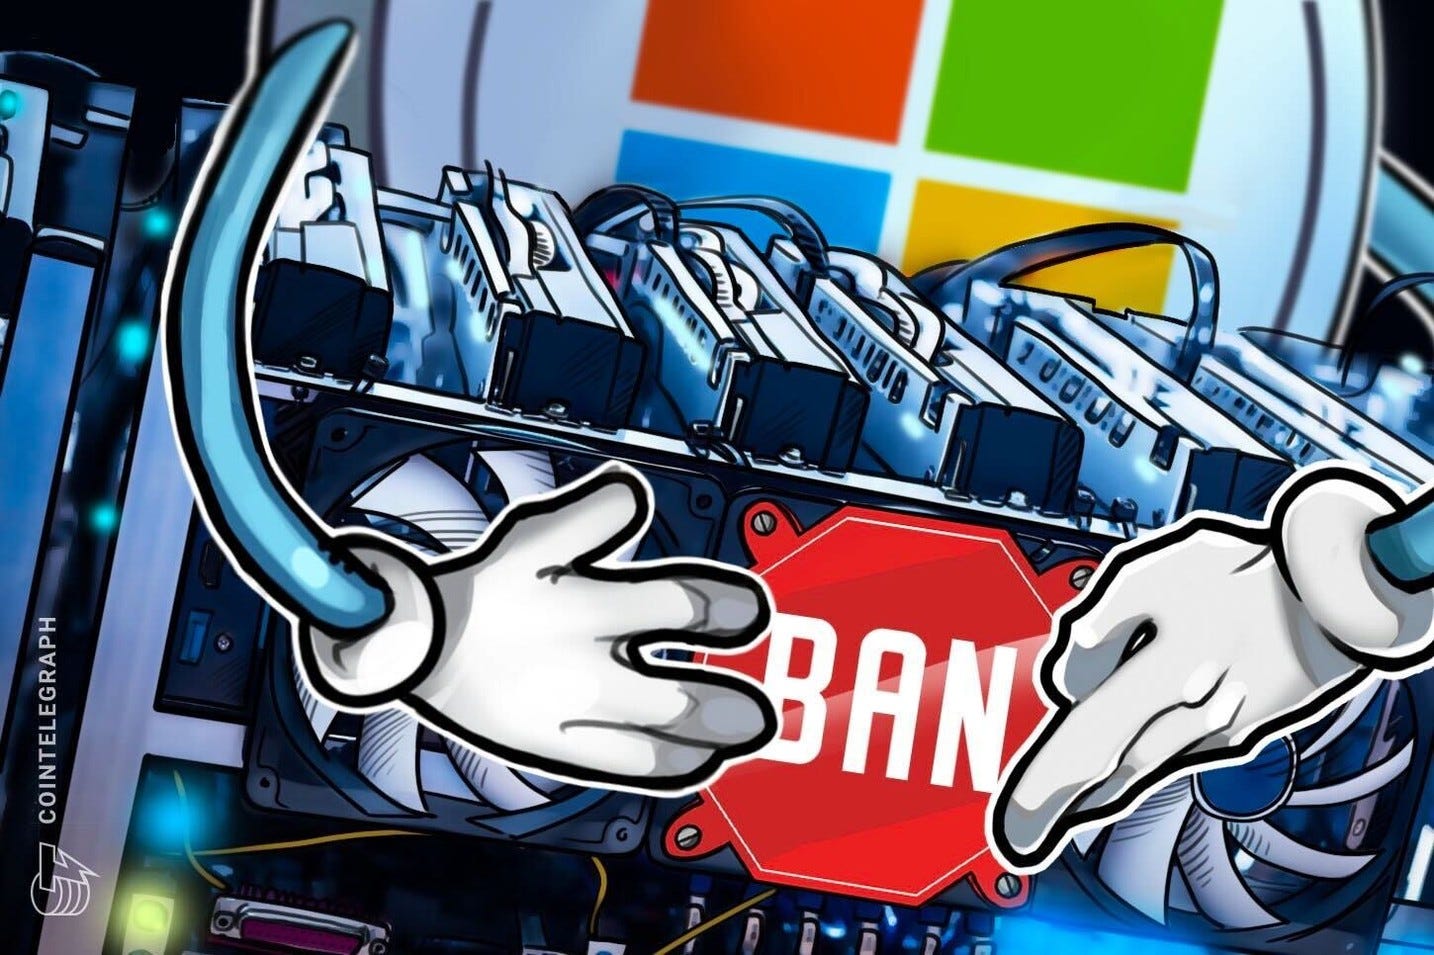 Microsoft bans cryptocurrency mining on cloud services